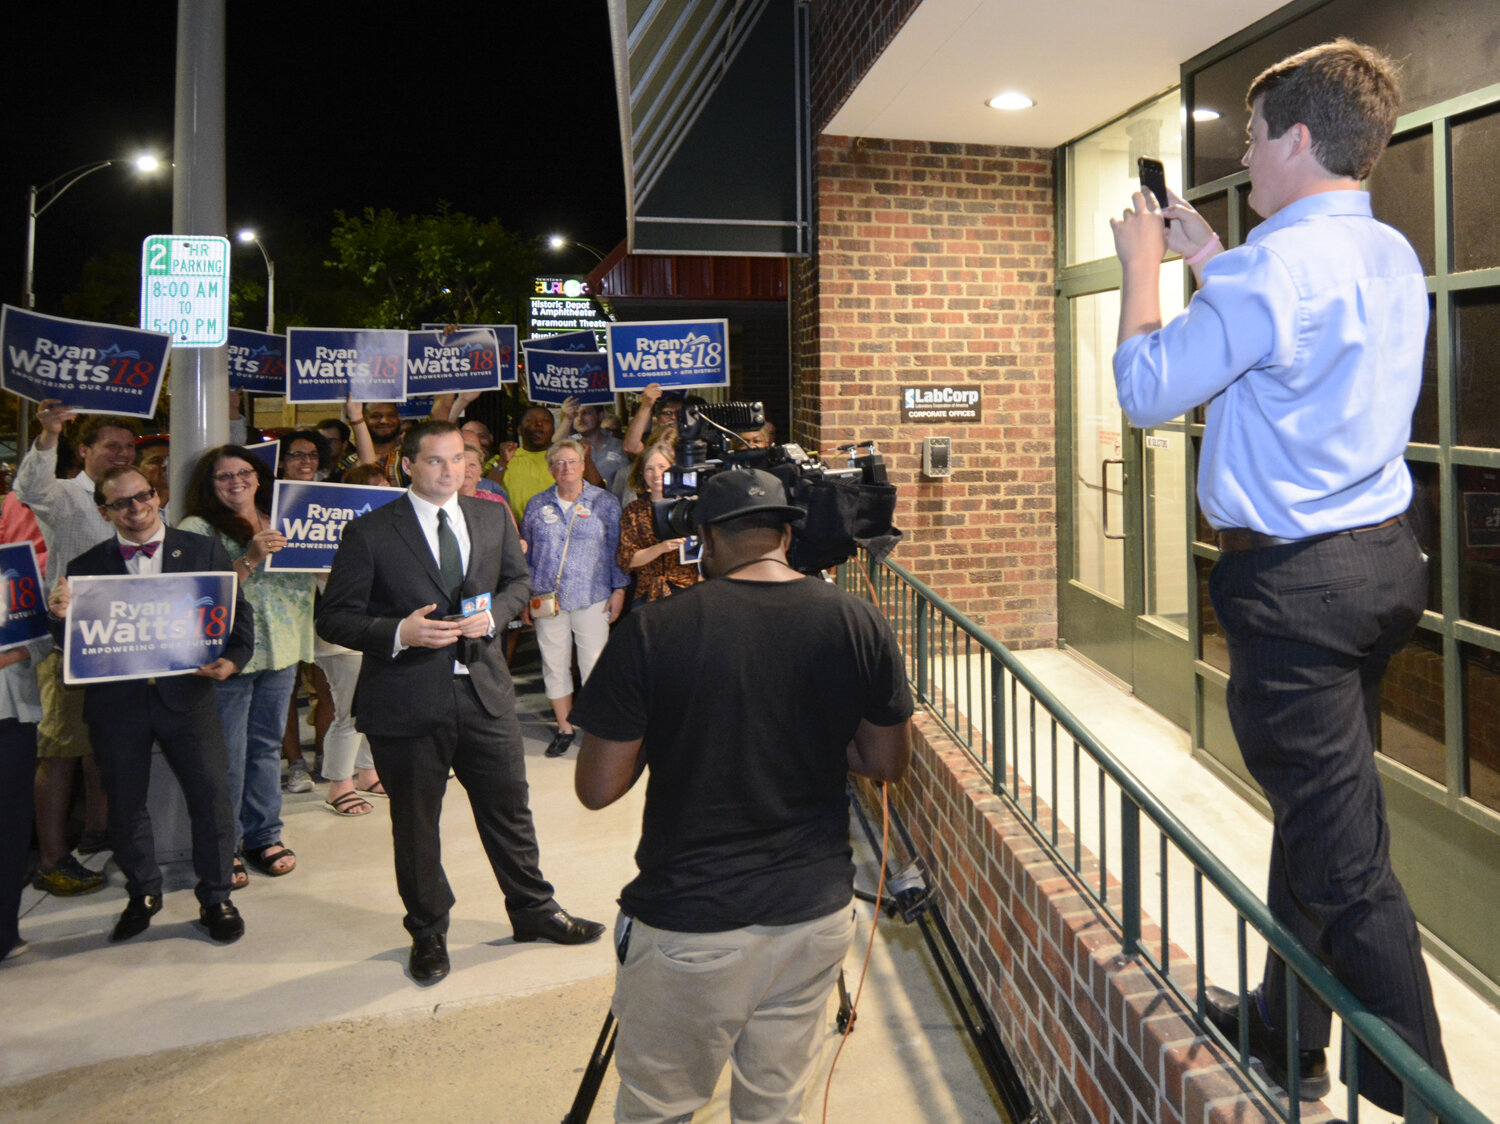  May 8, 2018 Taking in the scene on a victorious primary night Burlington, NC 